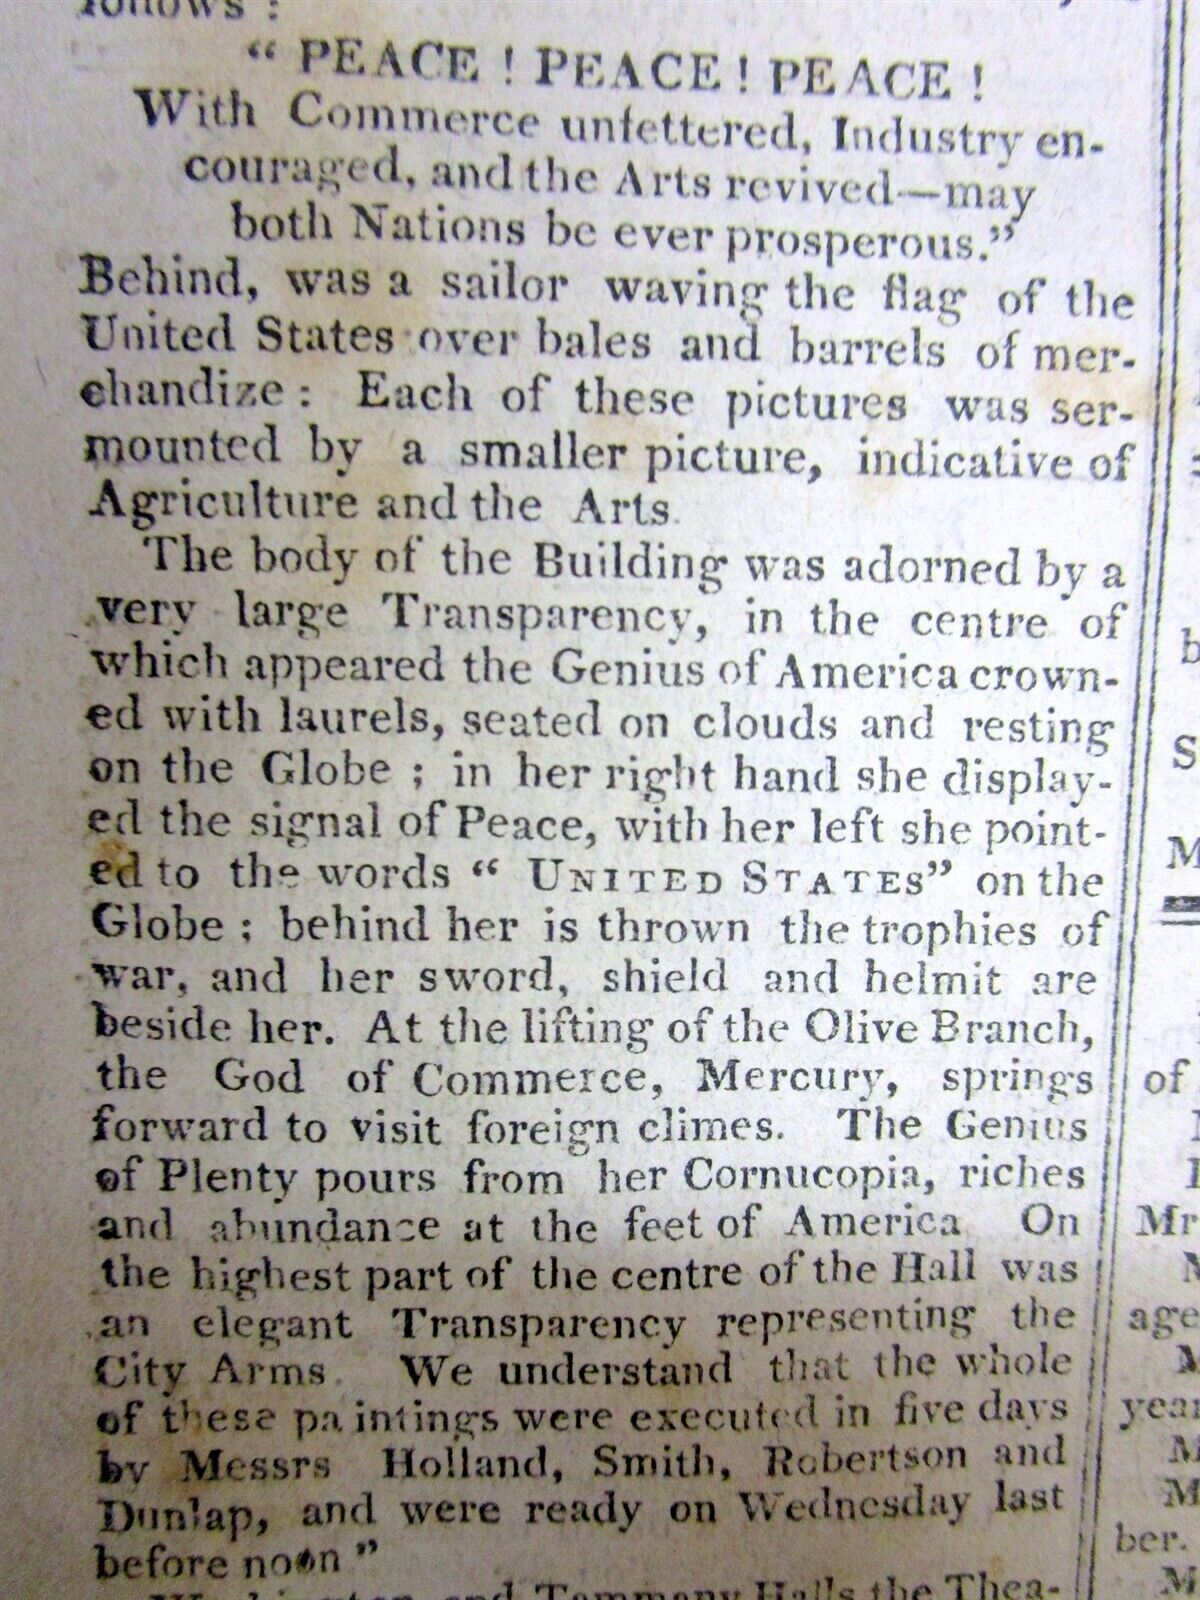 1815 newspaper with news of the PEACE TREATY marking the END of the WAR of 1812